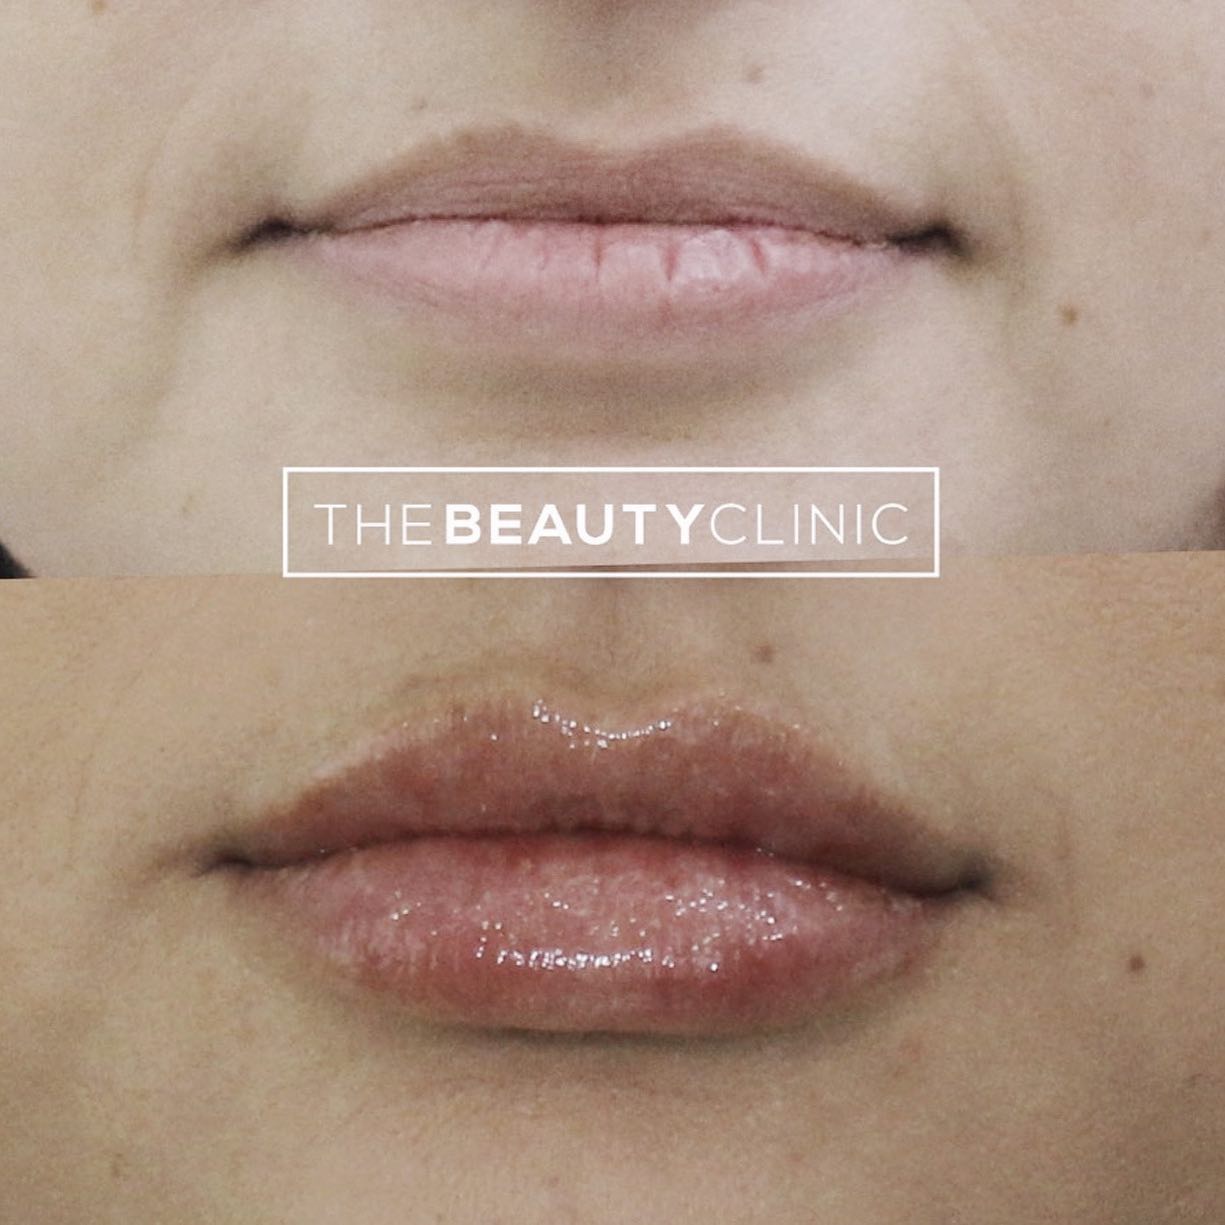 The Beauty Clinic We used 1 syringe of Restylane filler spread over two sessions to give her gradual, yet beautiful definition.